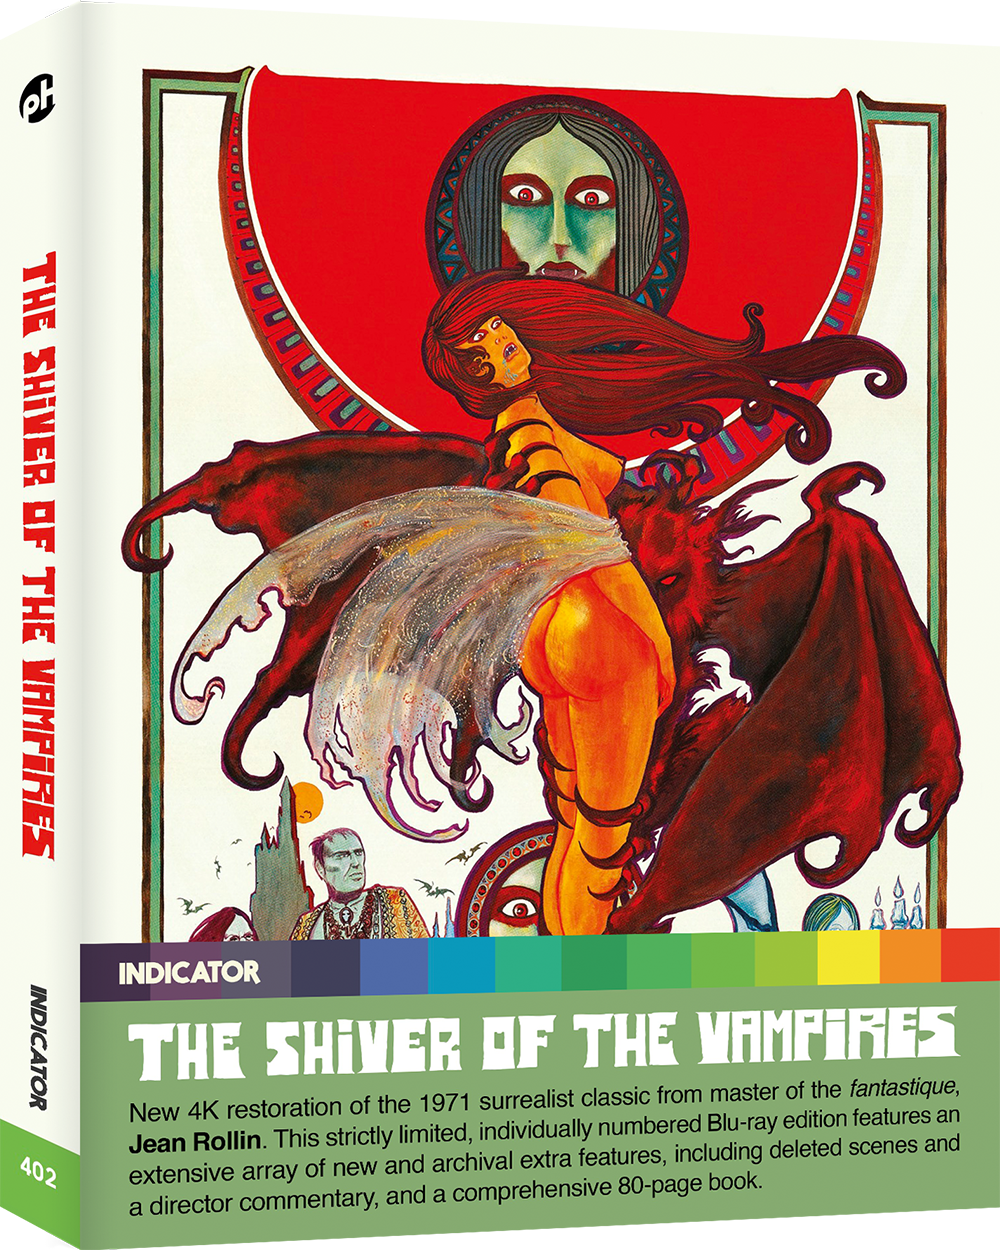 THE SHIVER OF THE VAMPIRES - Blu-ray LE